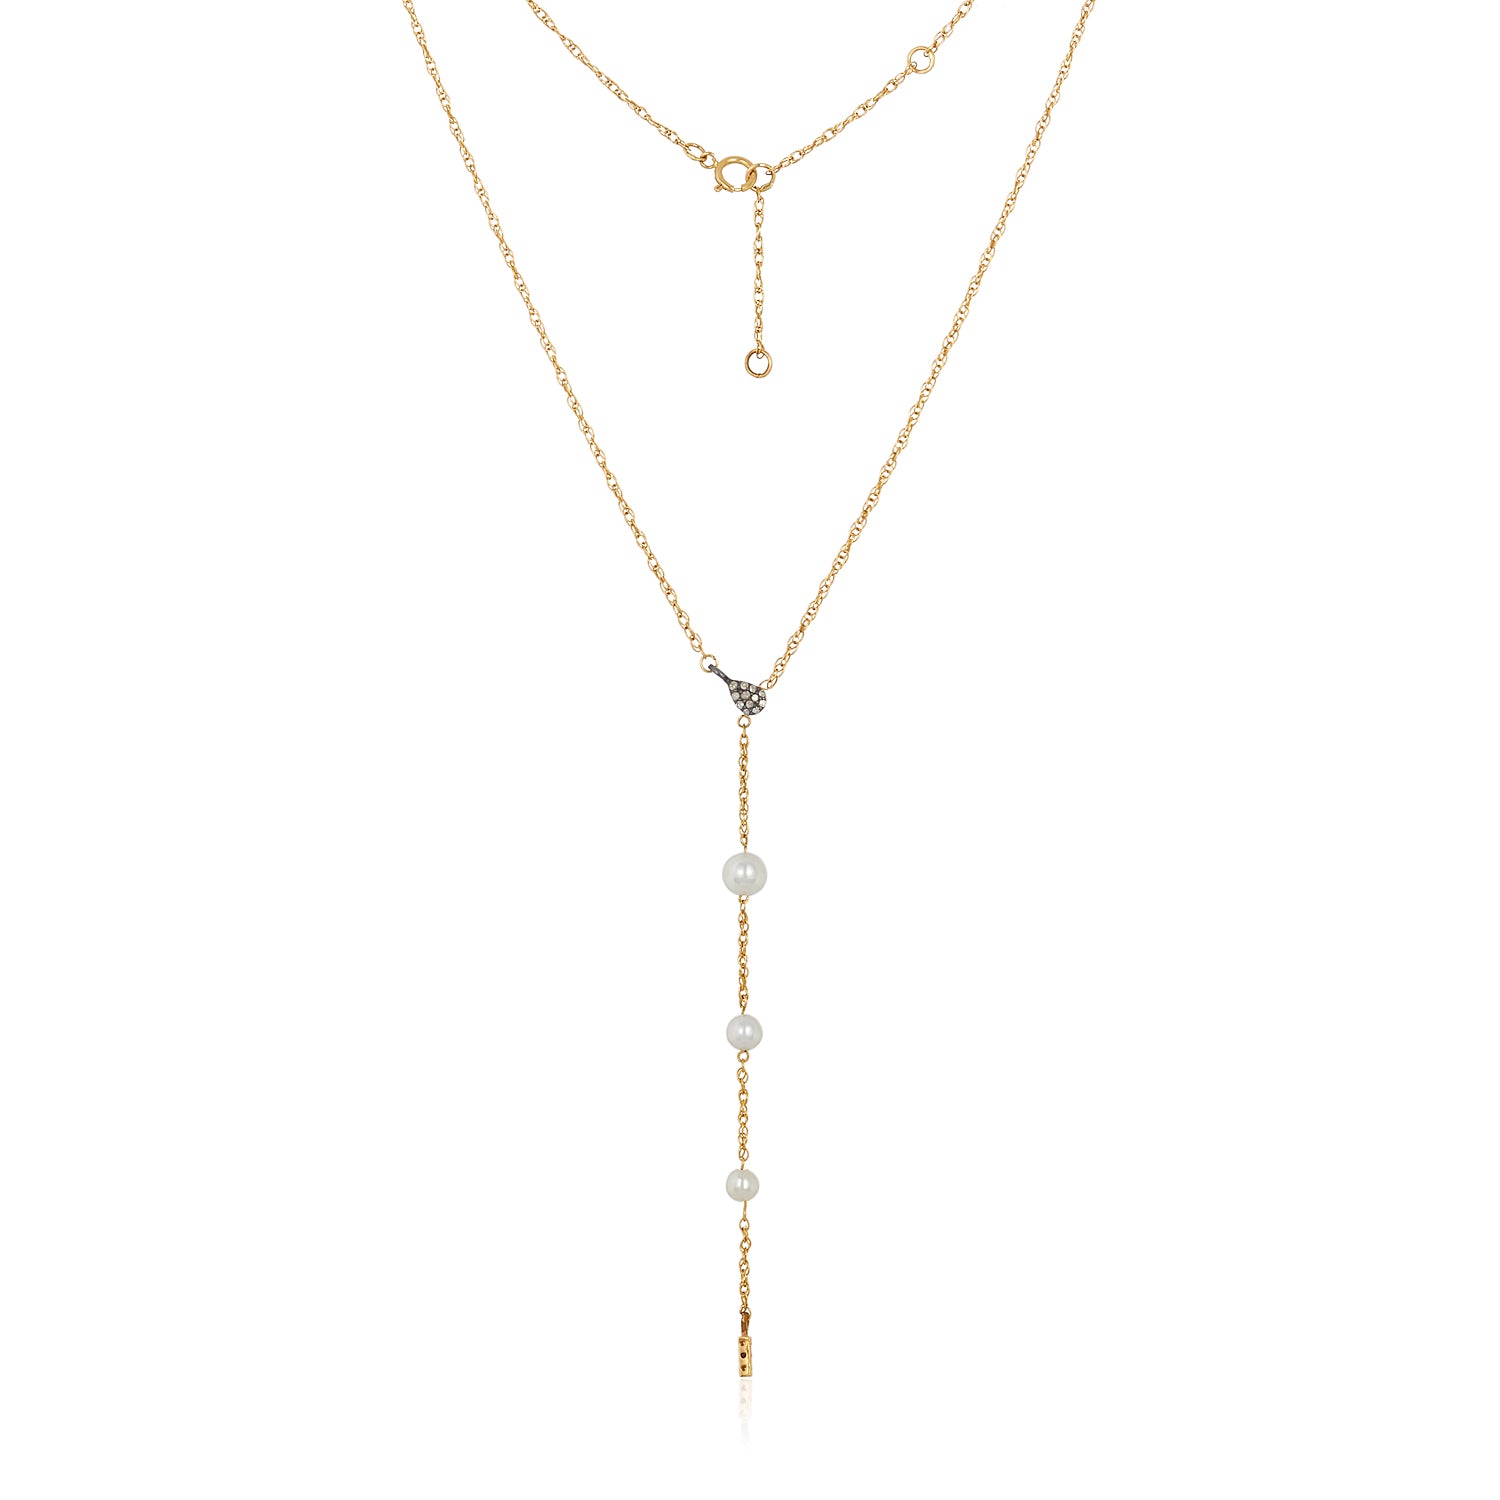 Cindy Graduated Pearl Lariat Necklace in 14k